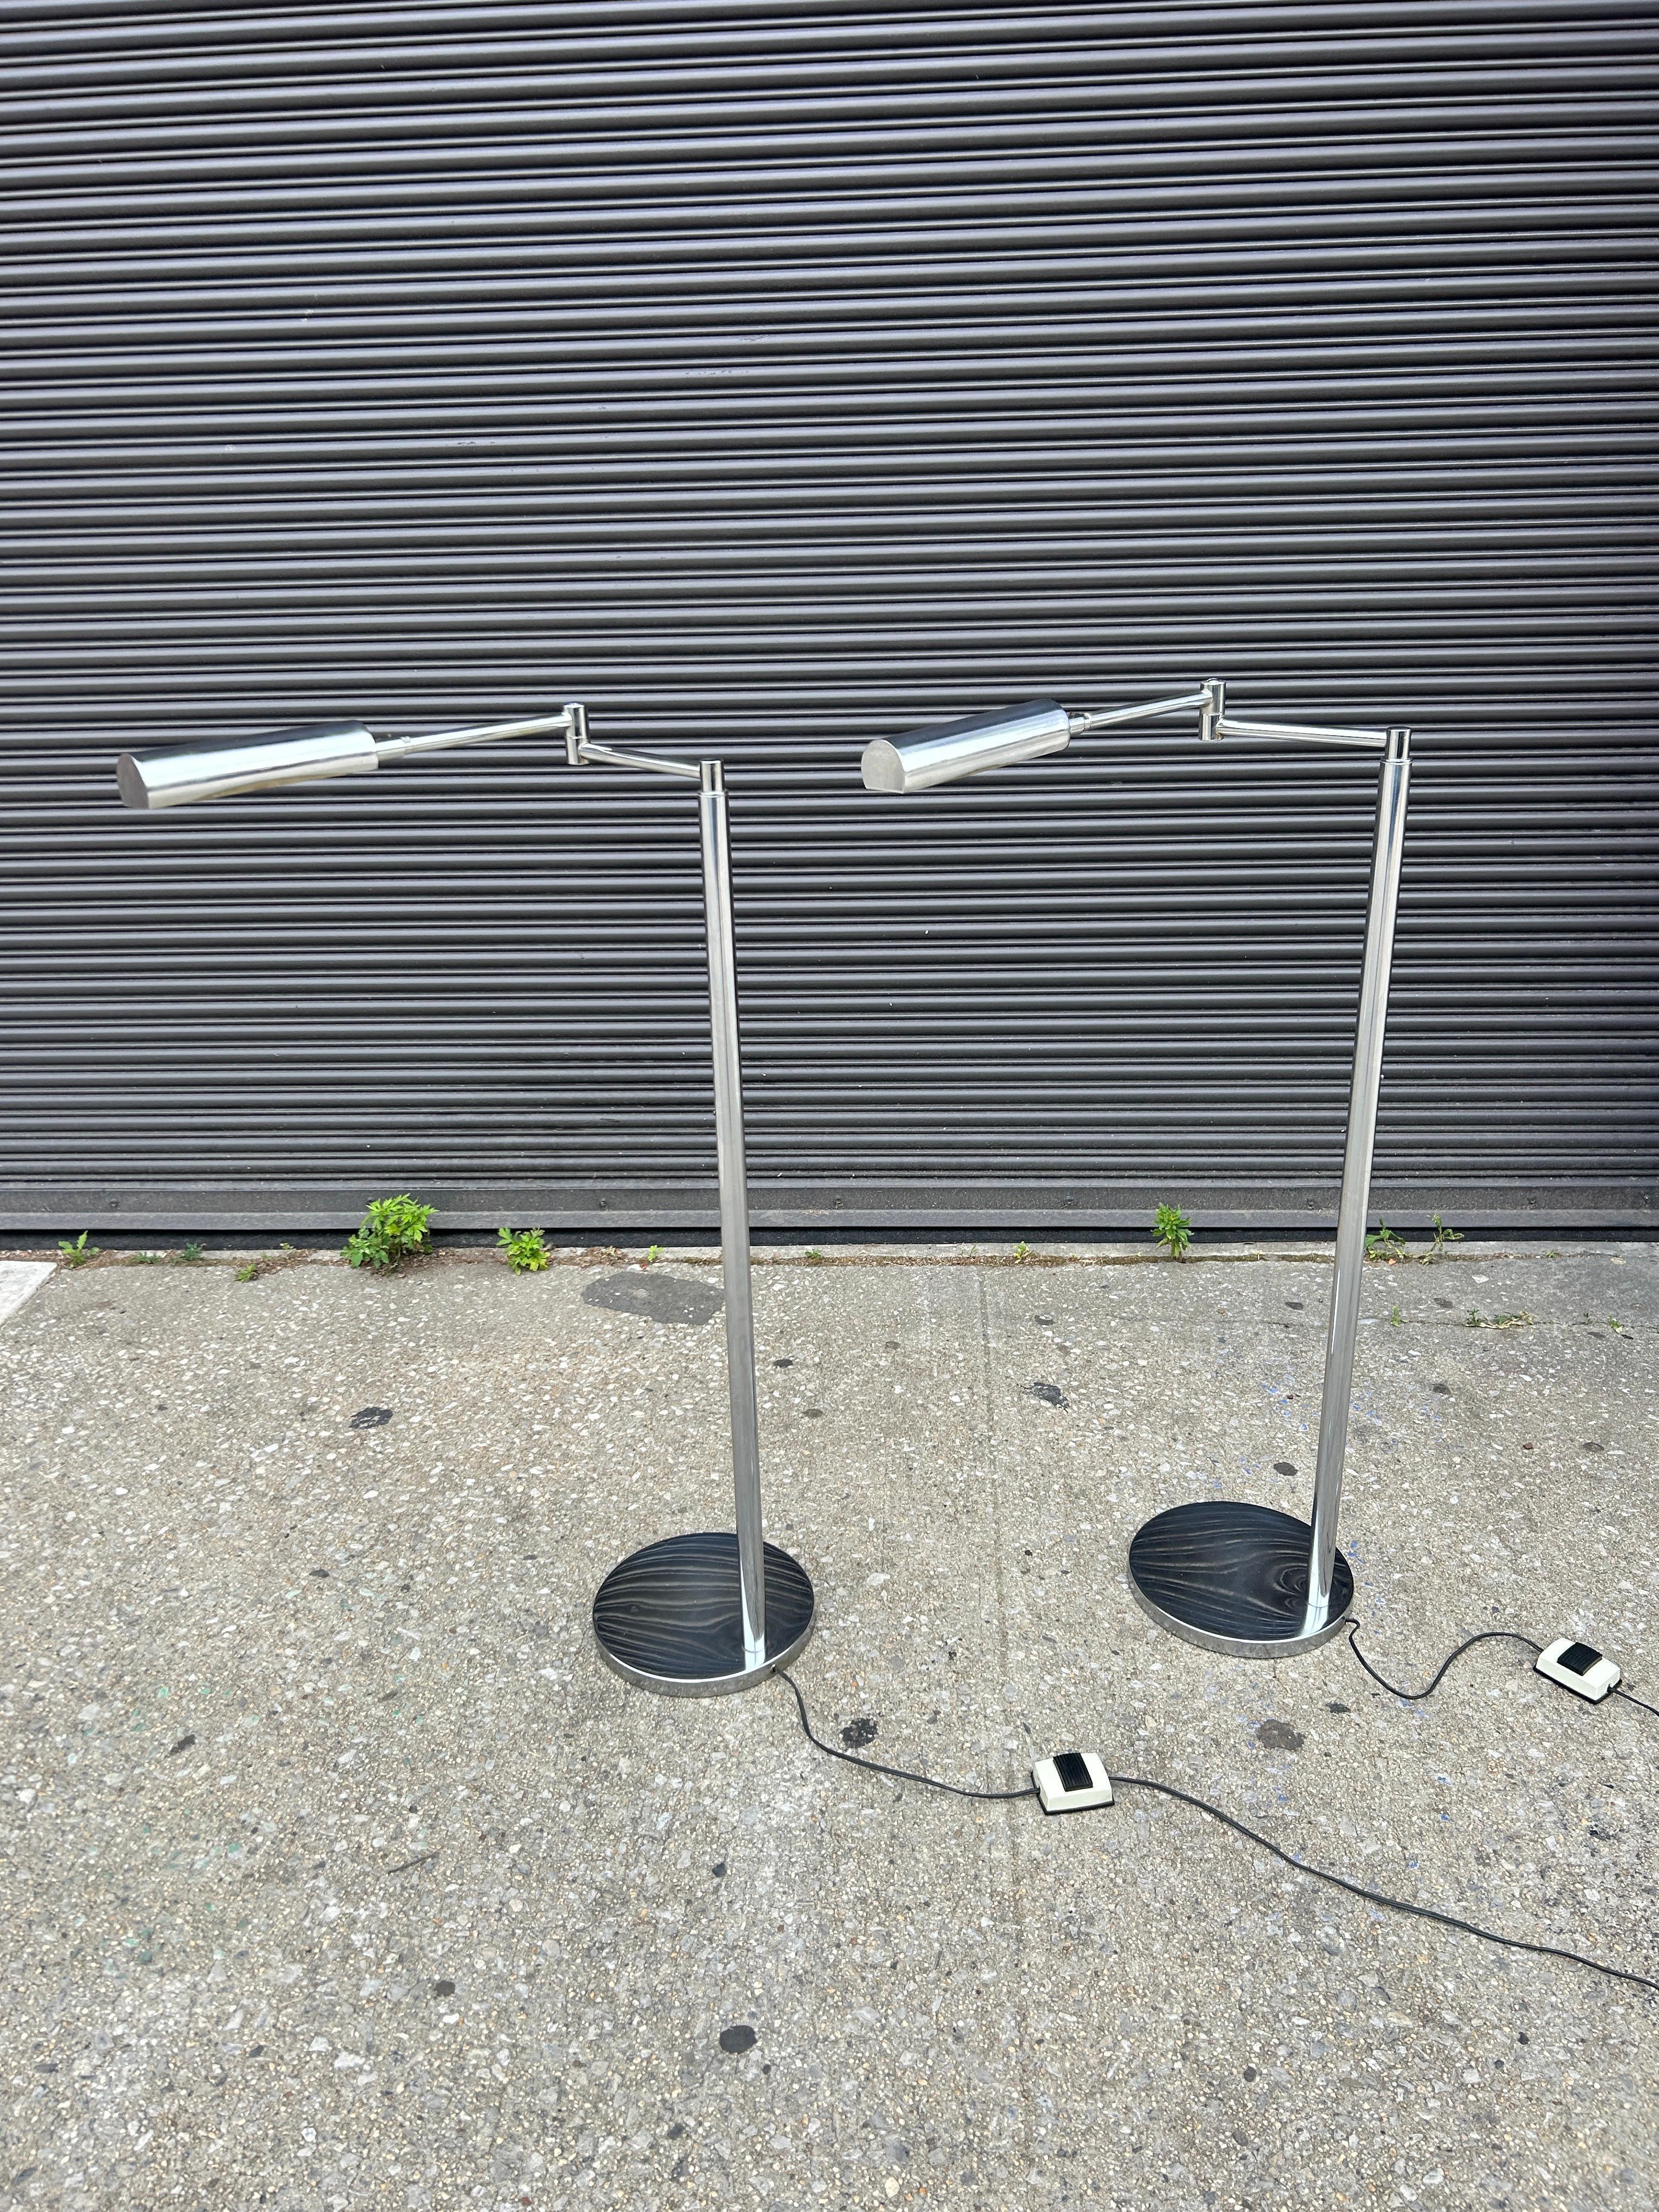 Pair of Chrome articulating floor Lamps circa 1970 by Koch & Lowy. Good working condition chrome is very clean. Height is adjustable from 43